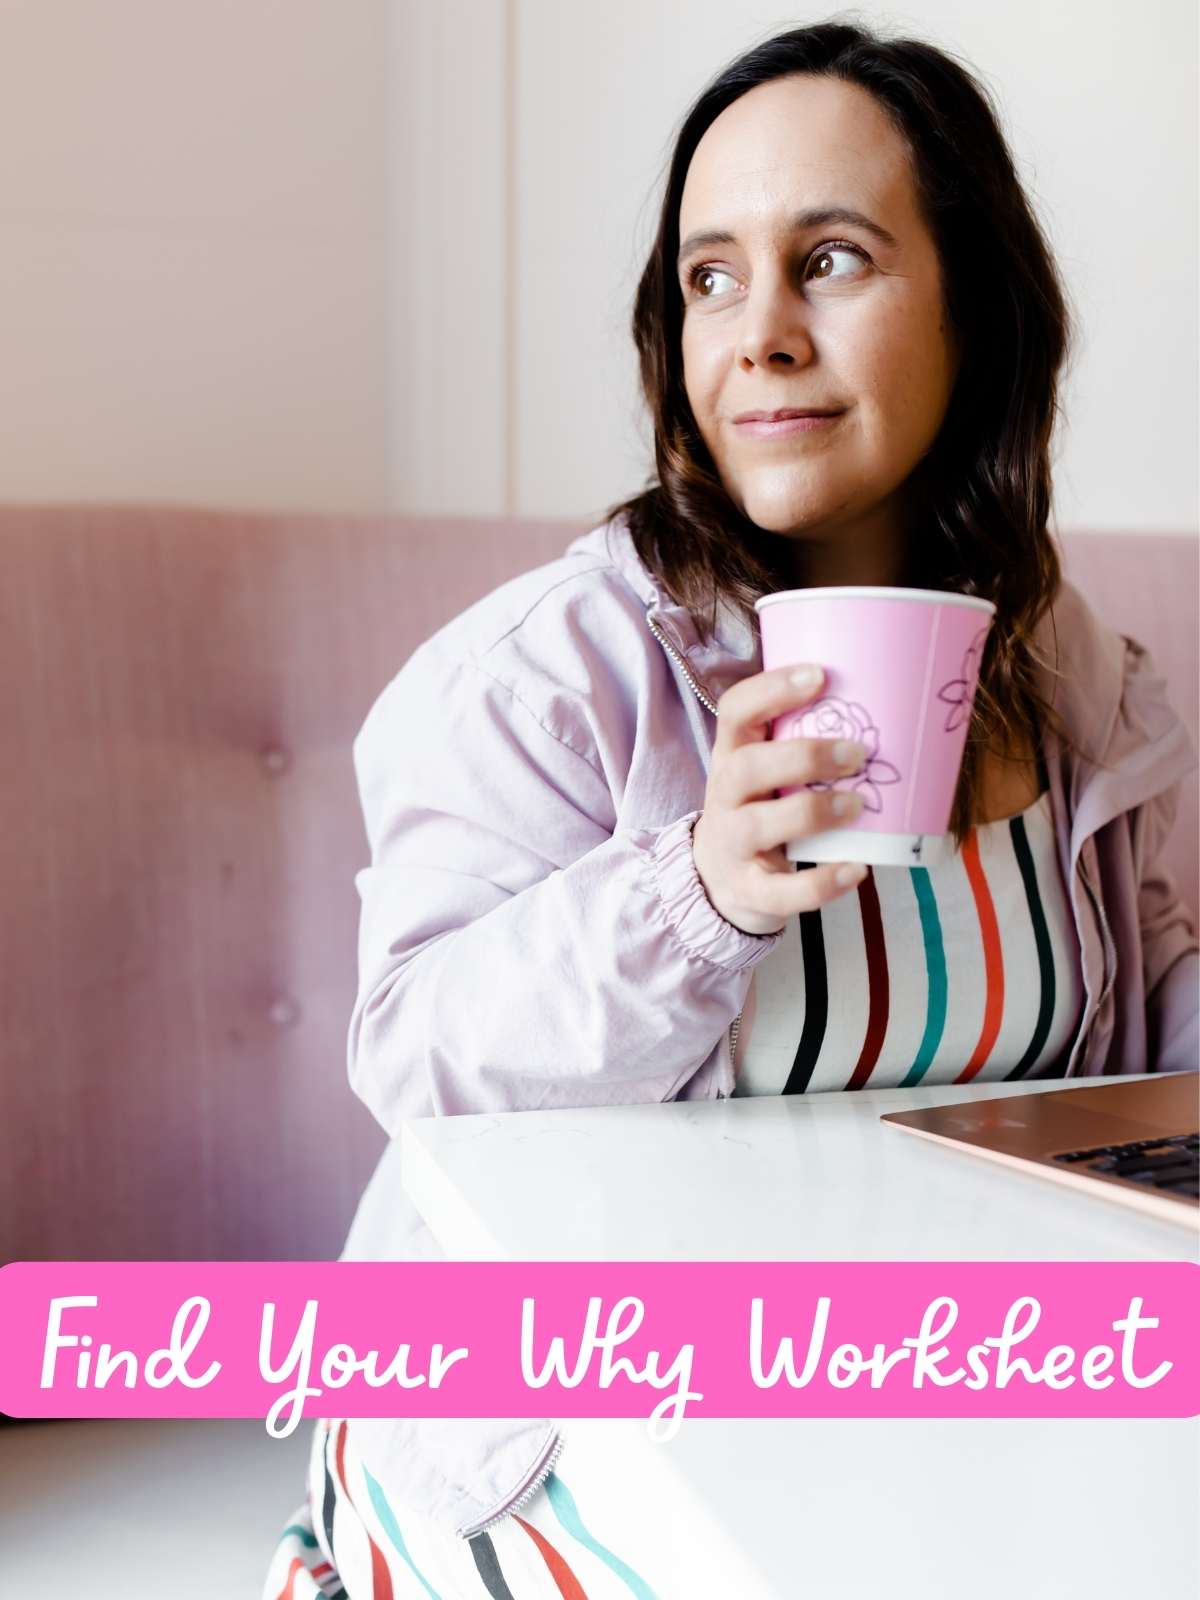 Find your why worksheet. Woman in coffee shop having drink.